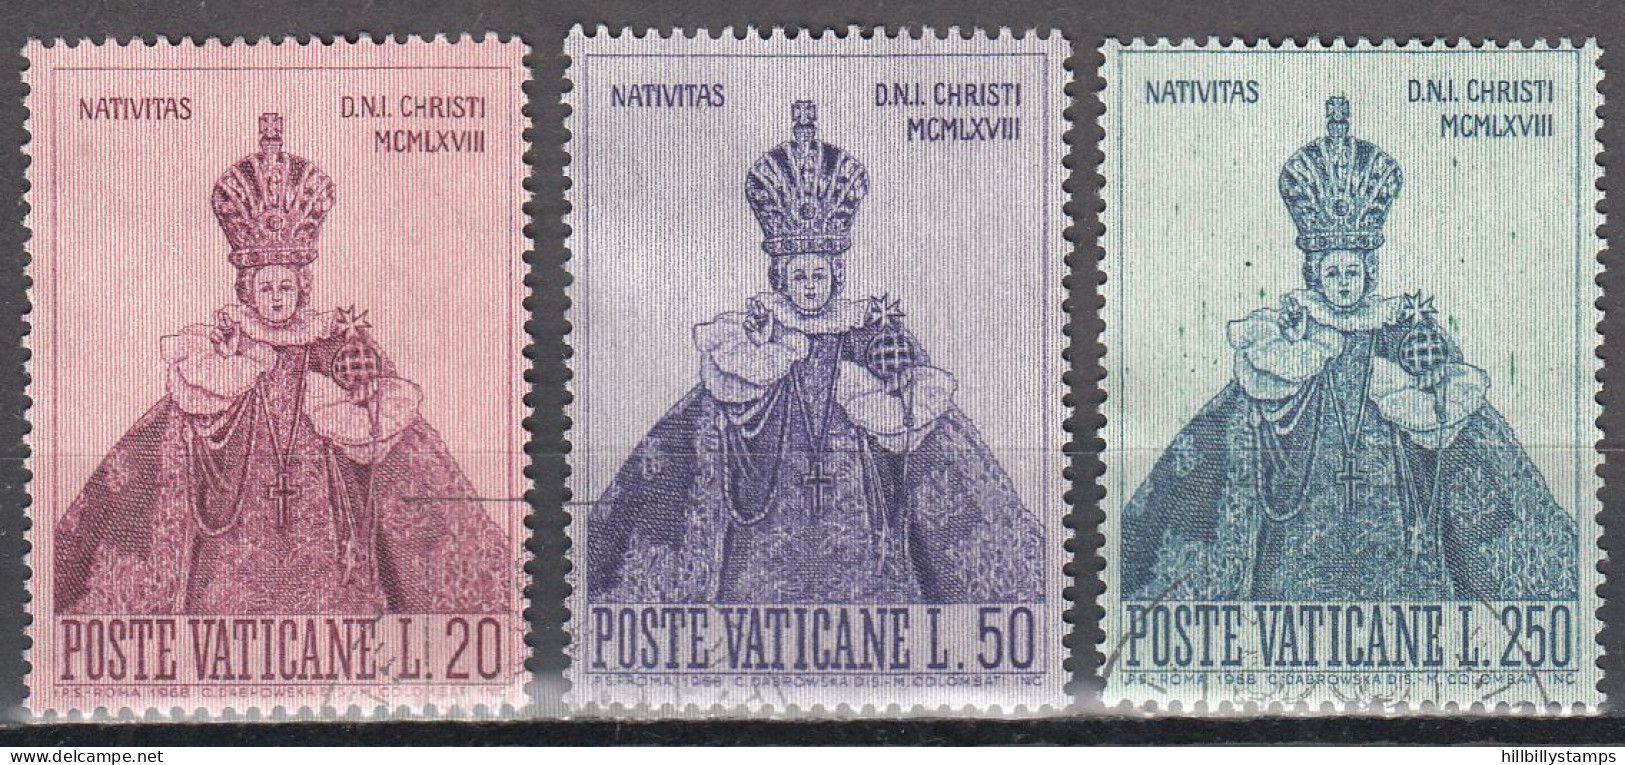 VATICAN   SCOTT NO 464-66   USED   YEAR  1968 - Used Stamps